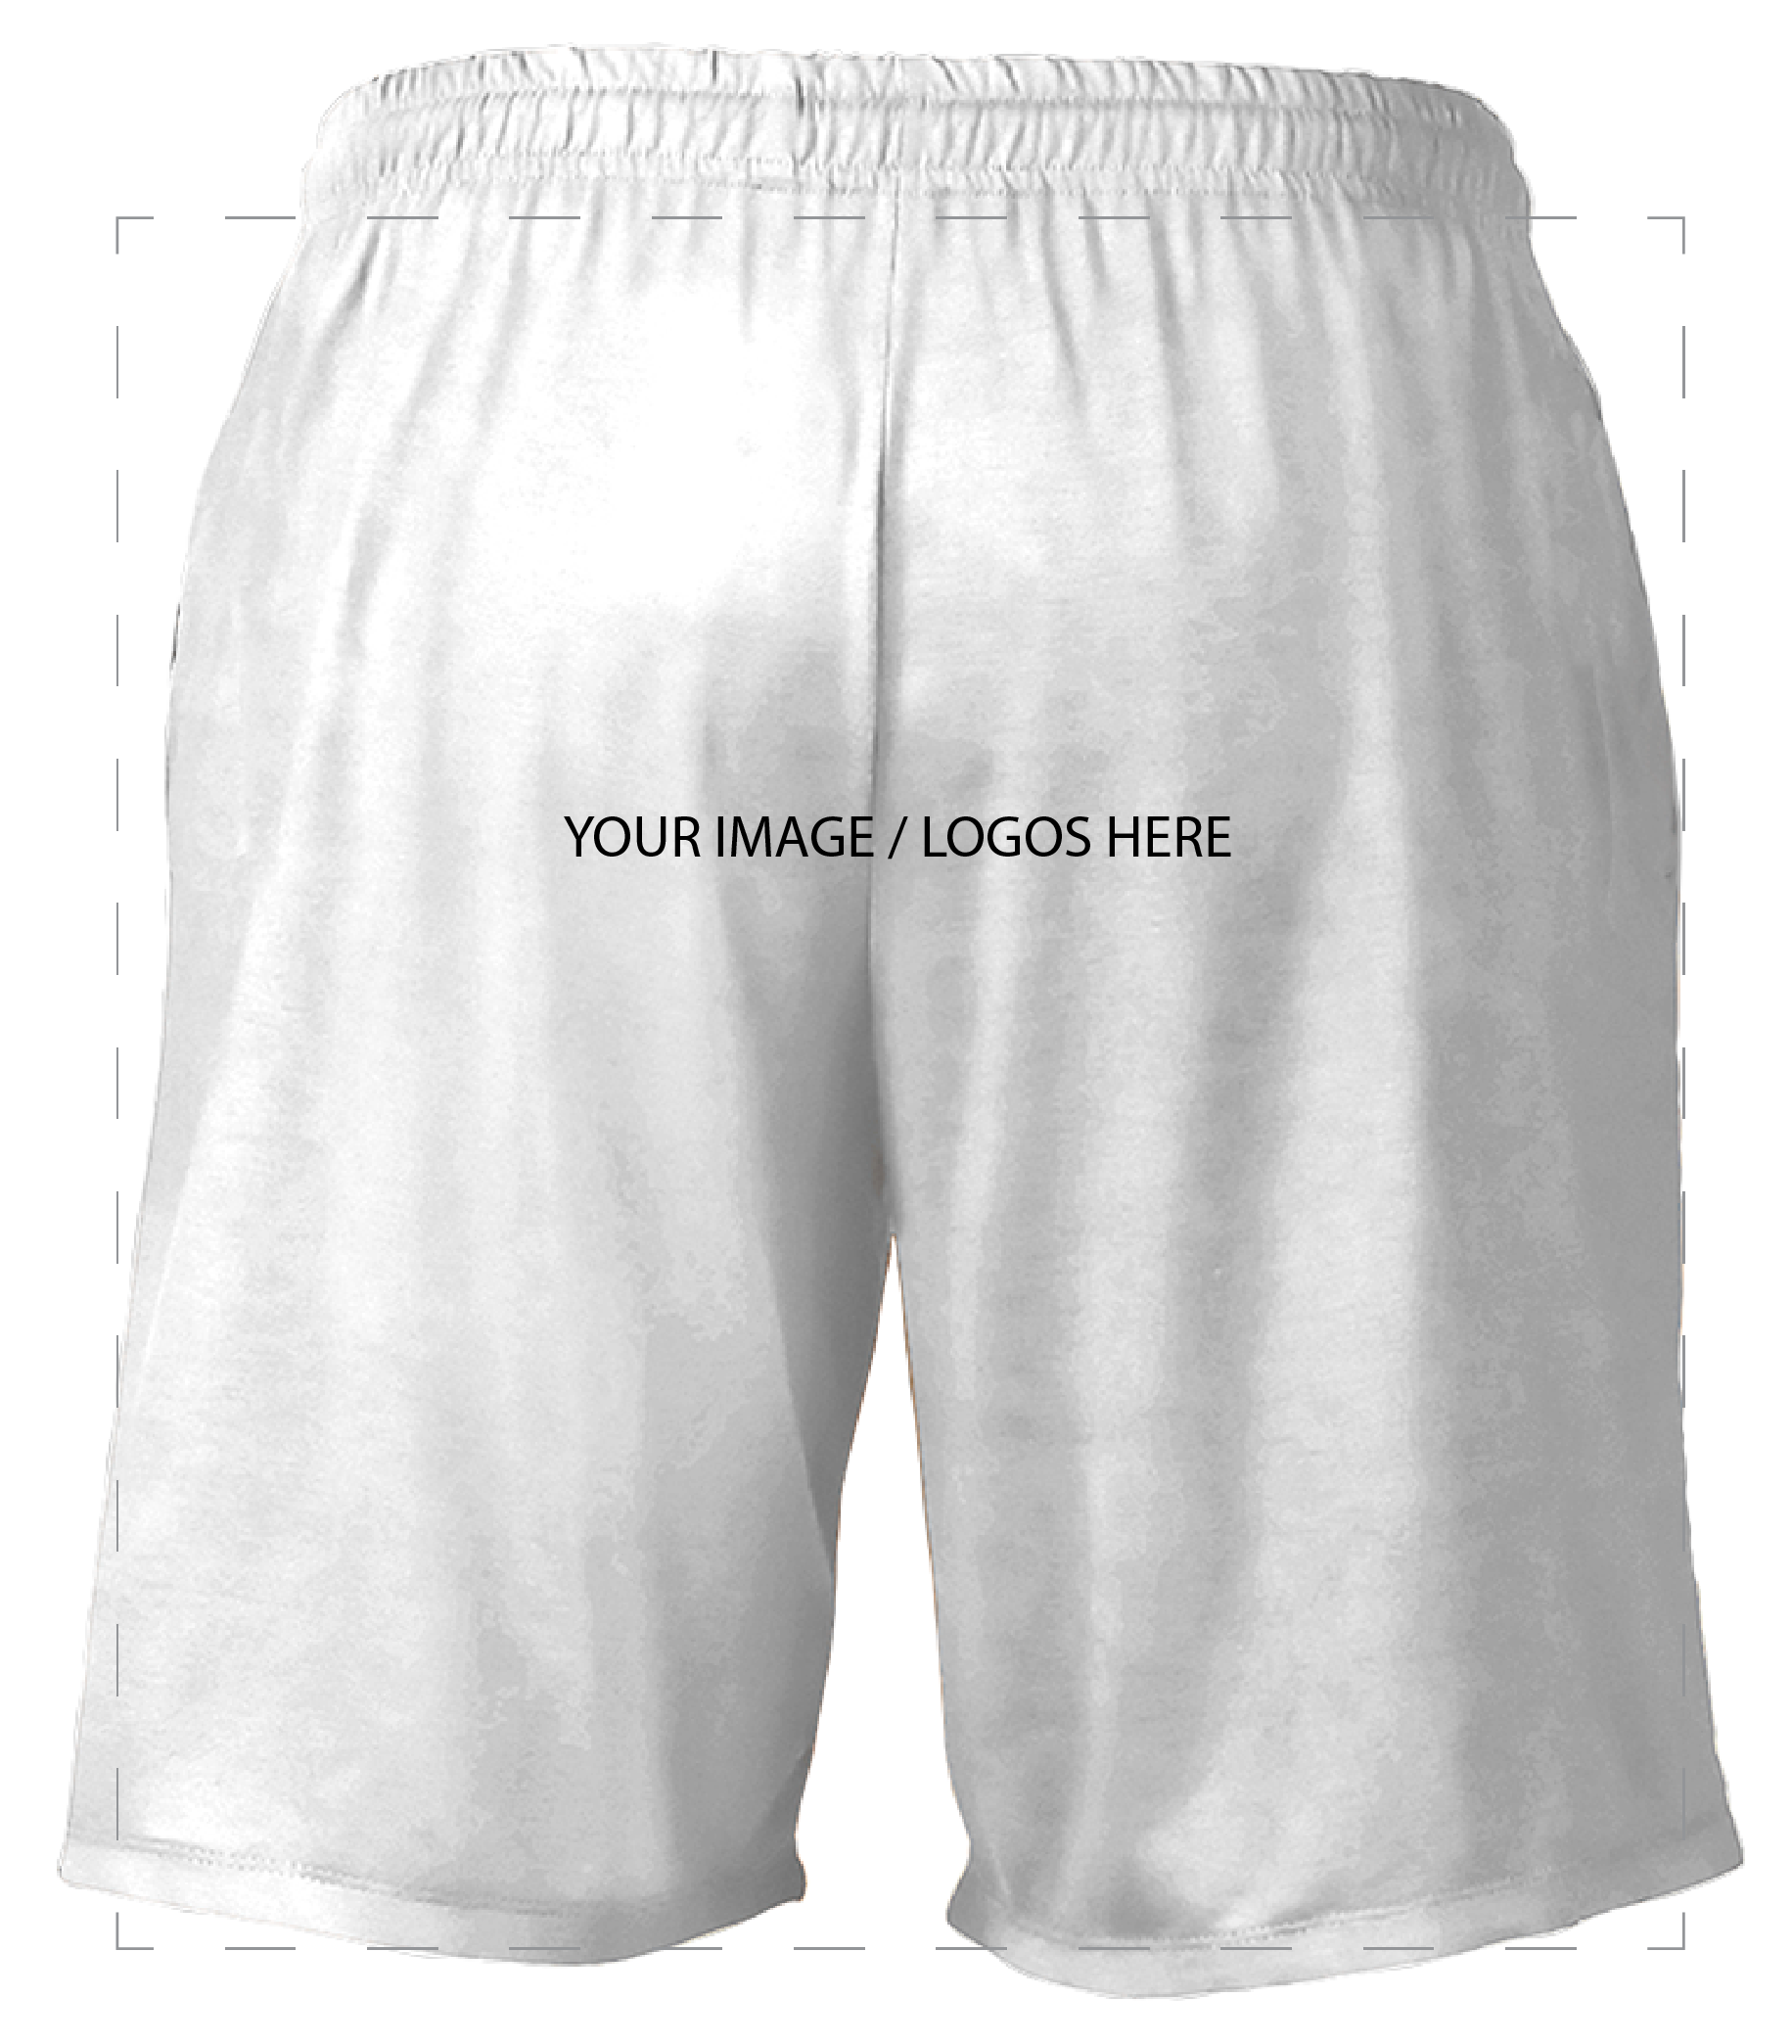 Basketball Shorts 167 - Customize with Free Numbers, Names & Logos